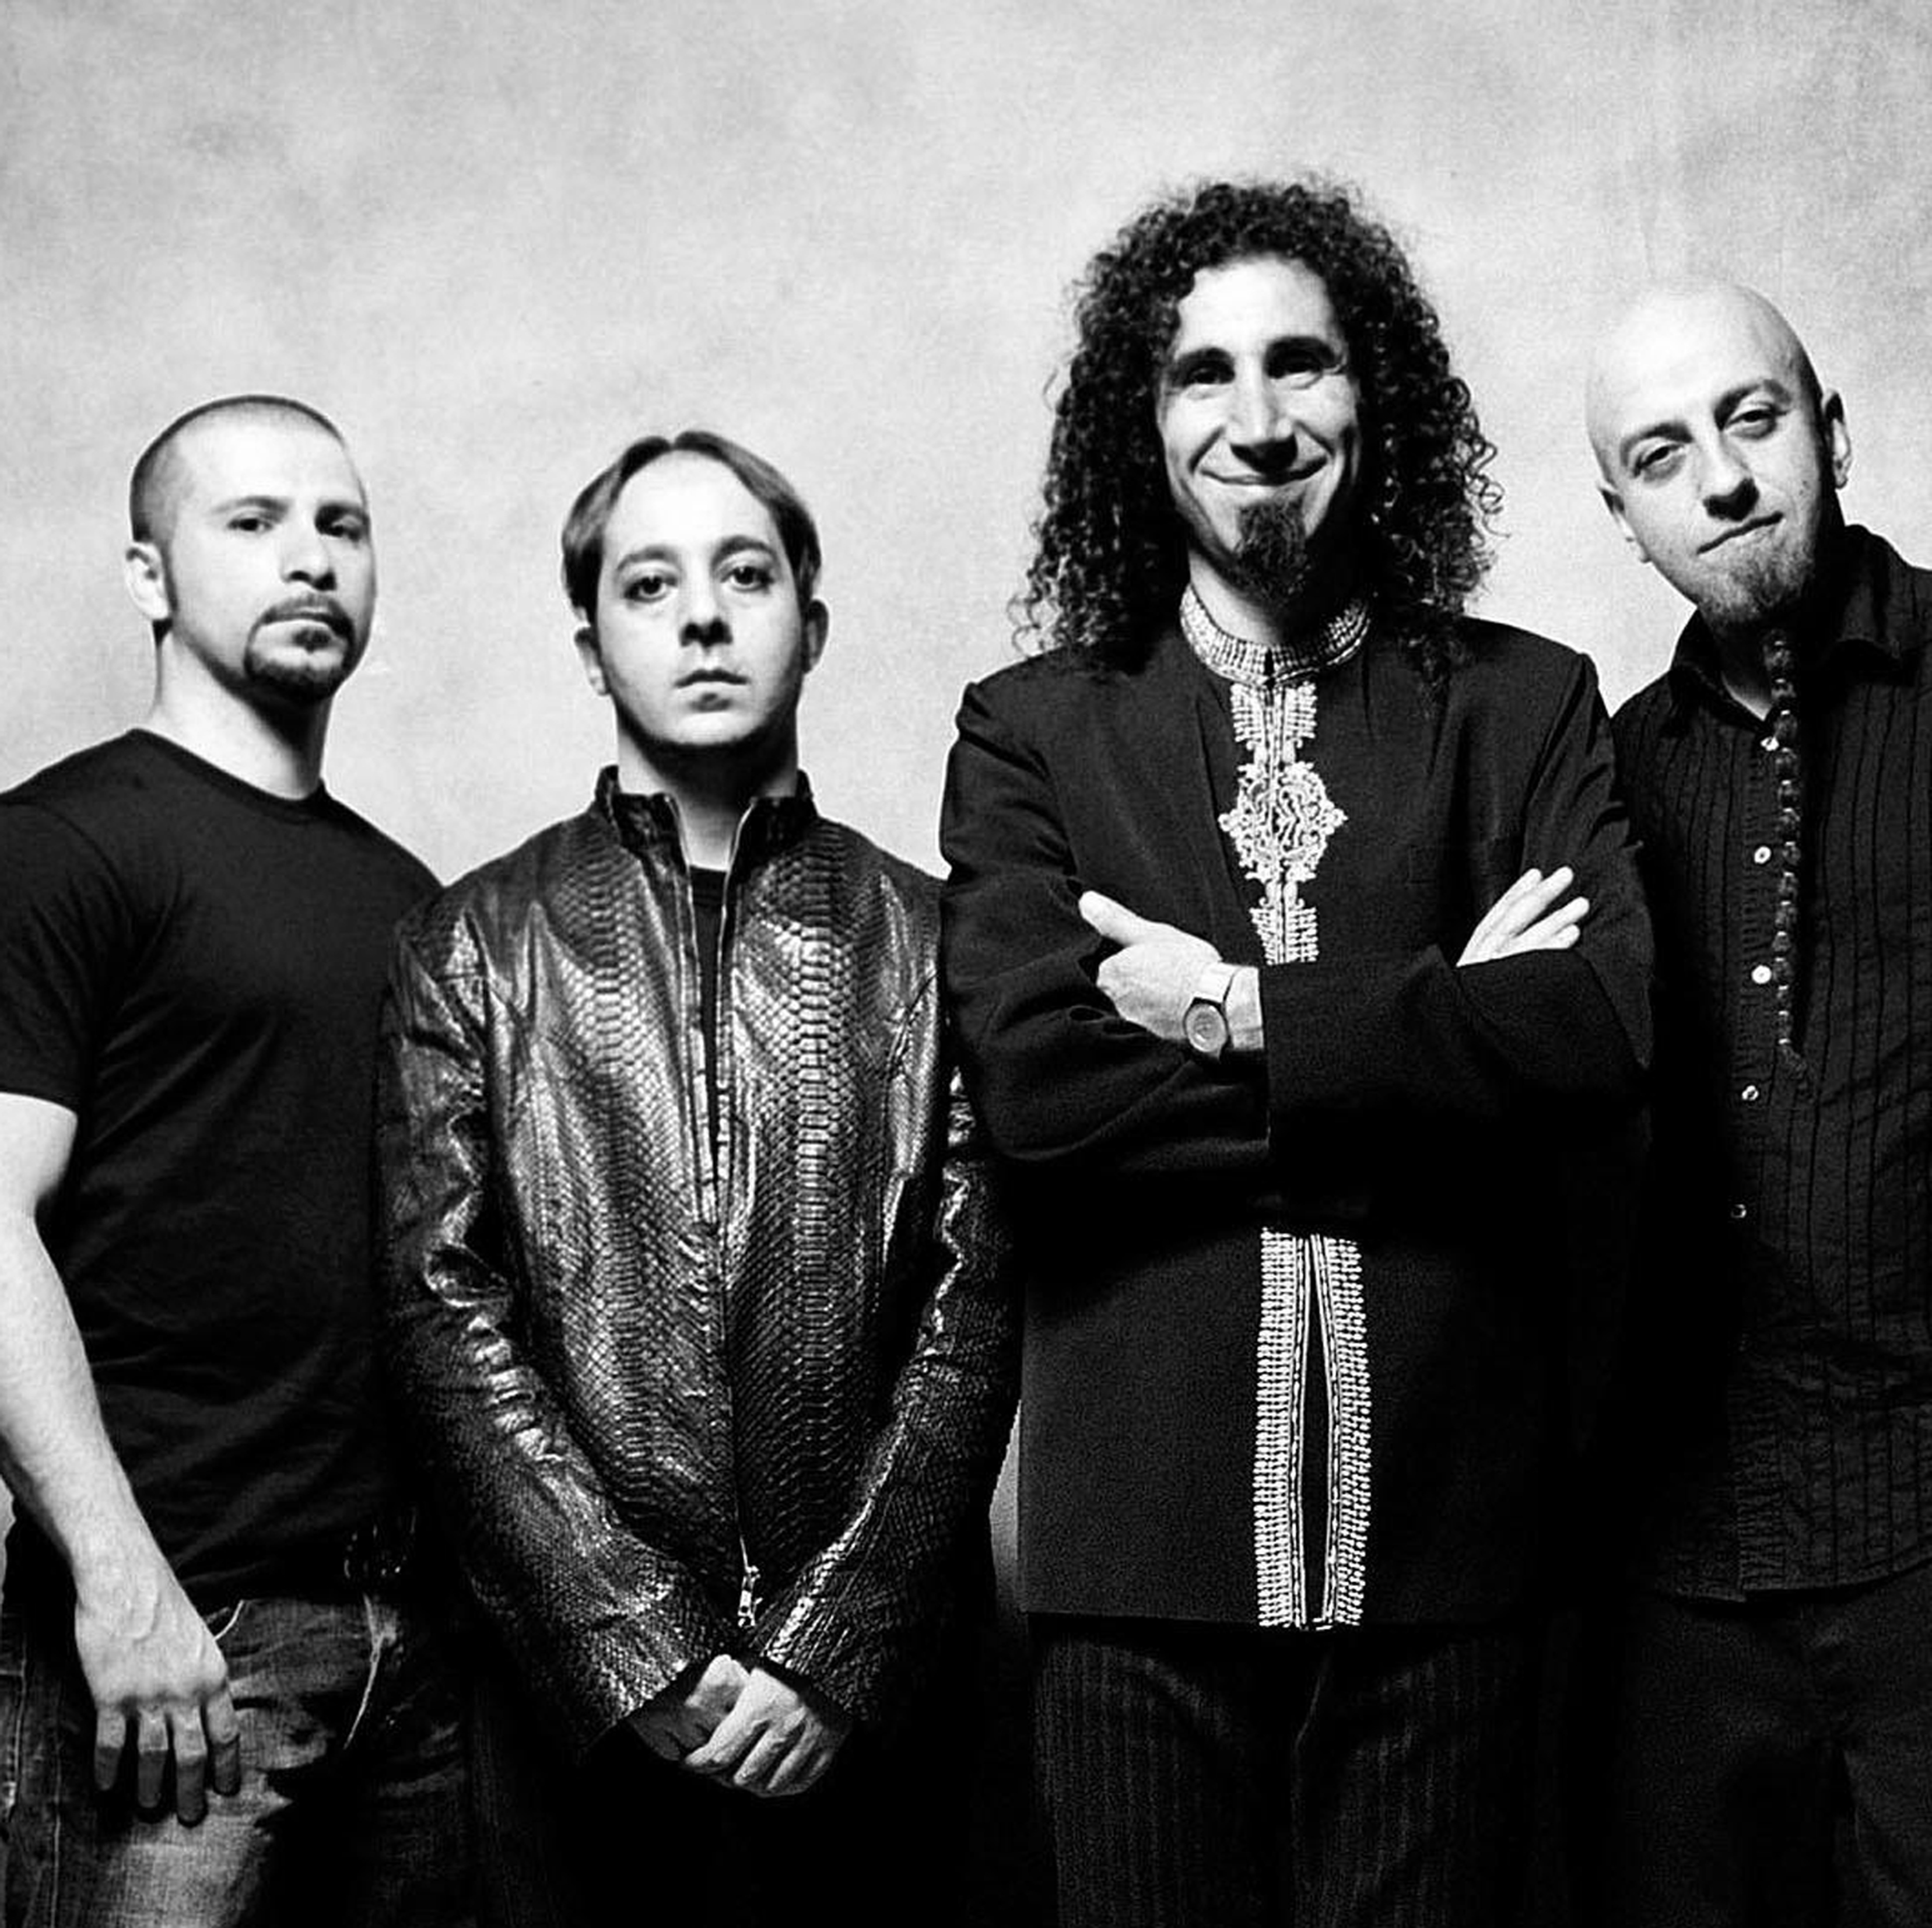 System of a down википедия. System of a down. SOAD группа. System of a down состав группы. Группа System of a down 1998.